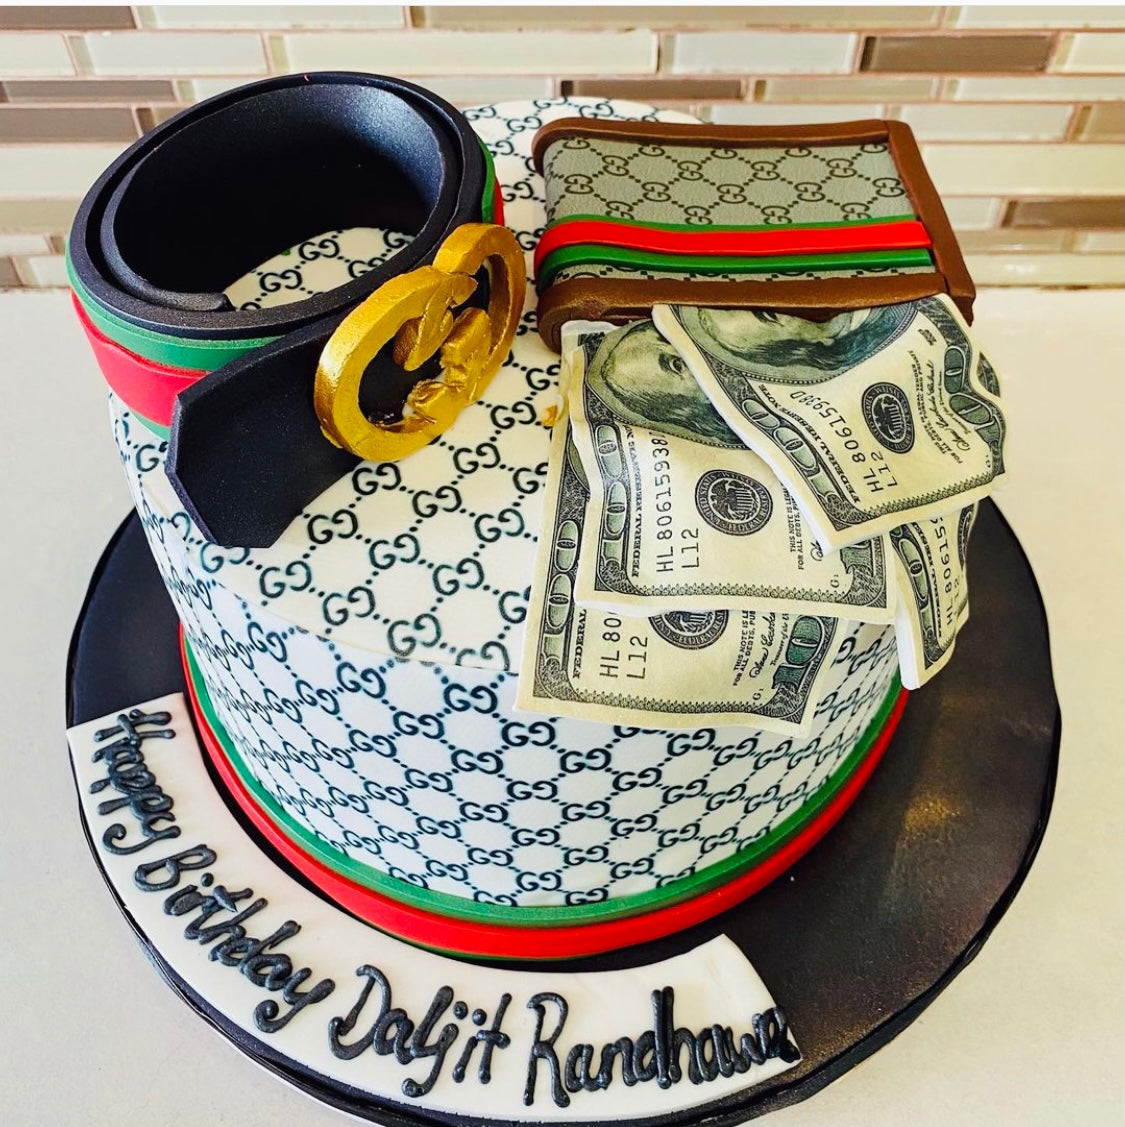 Gucci cake  Gucci cake, Birthday cakes for men, Cool birthday cakes